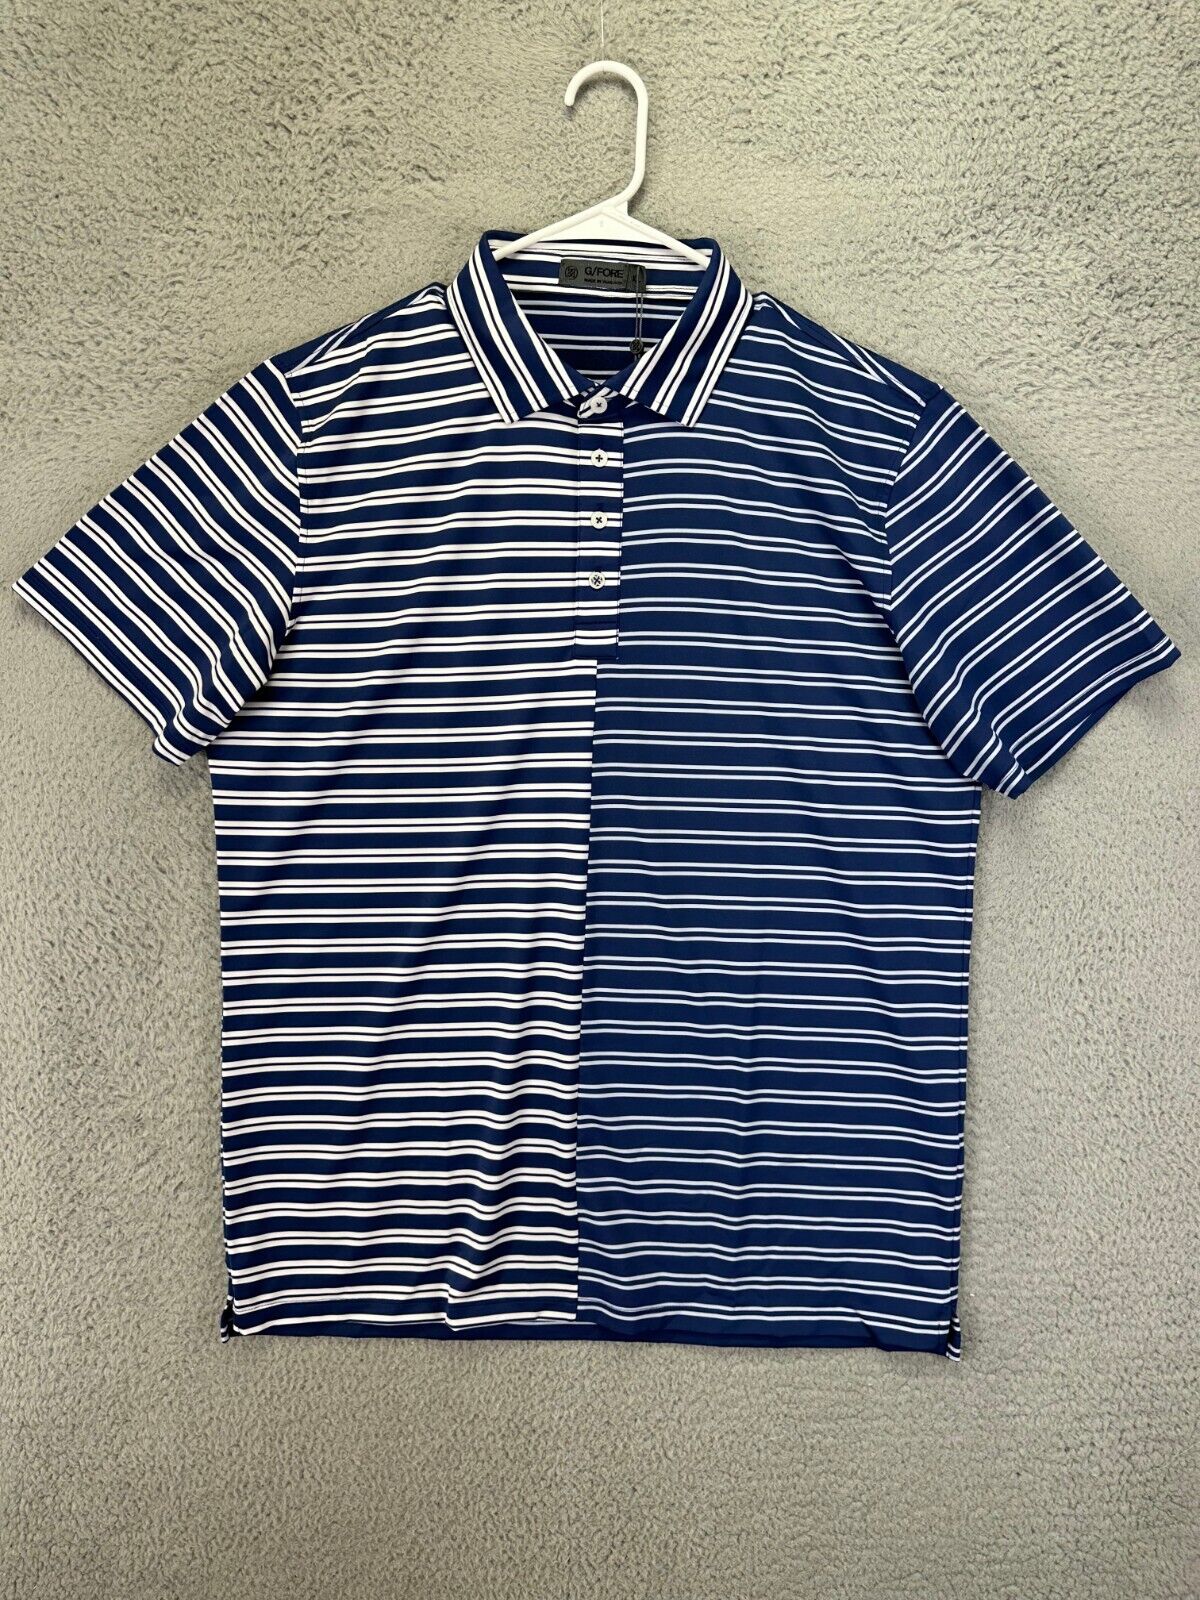 G/Force Polo Shirt Adult XL Blue Striped Golf Rugby Activewear Outdoor Mens NEW